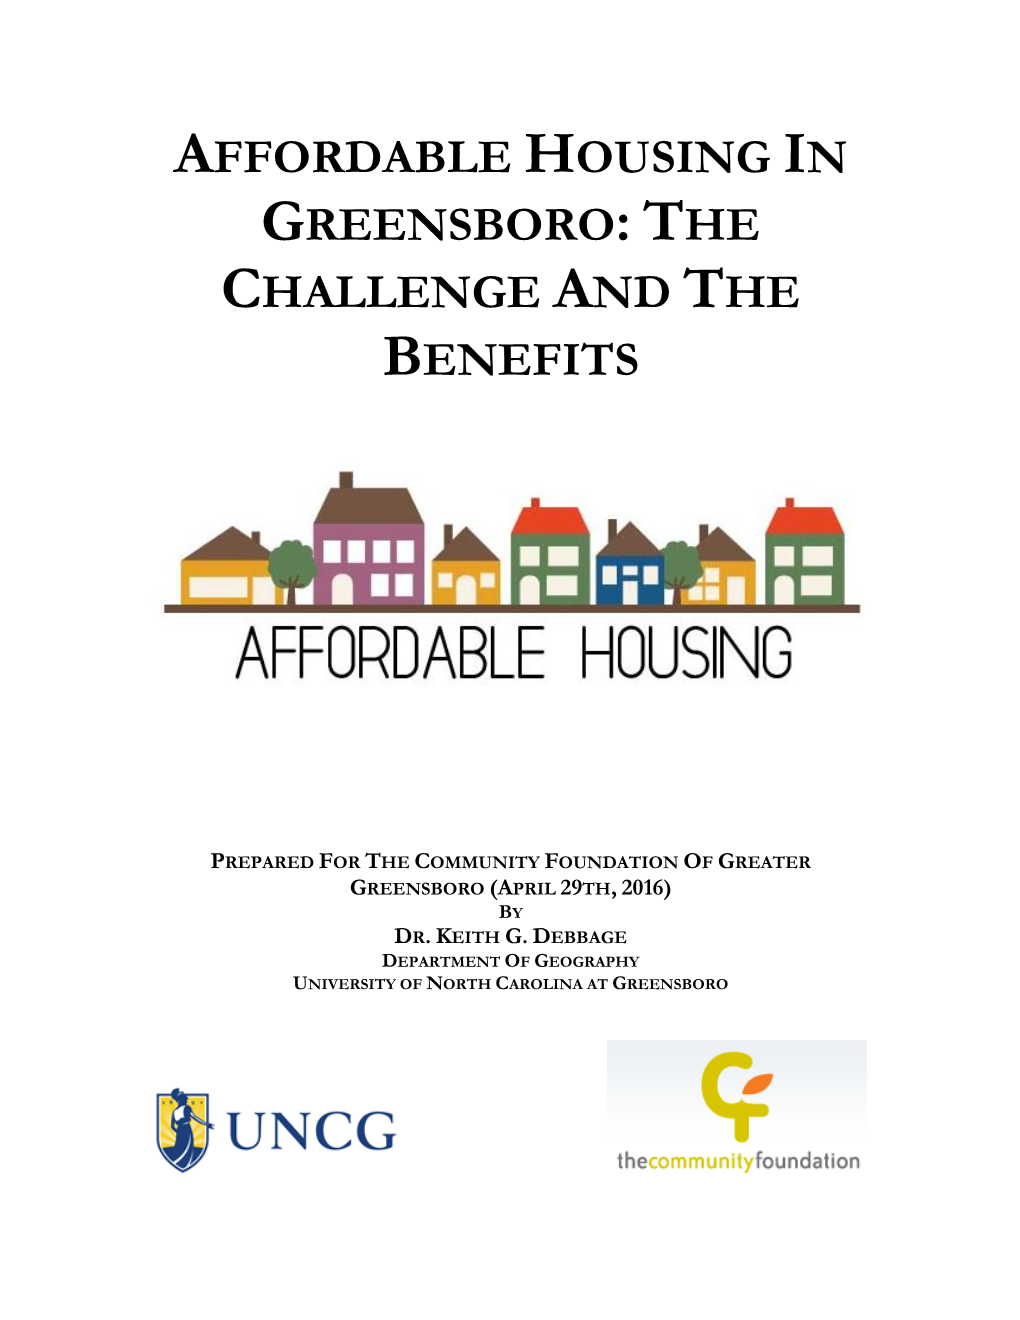 Affordable Housing in Greensboro: the Challenge and the Benefits